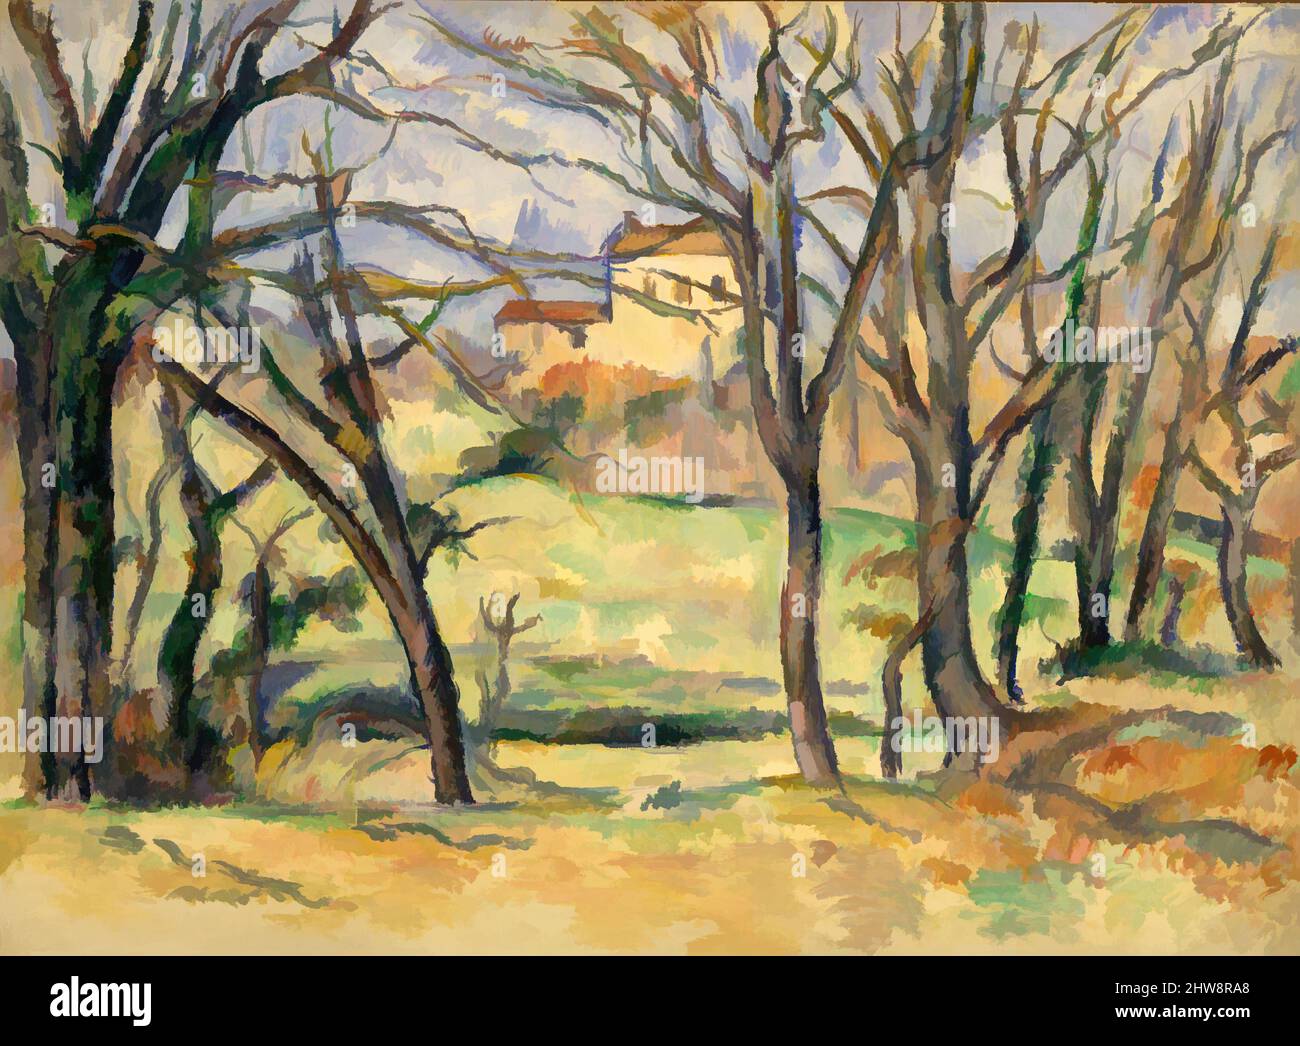 Art inspired by Trees and Houses Near the Jas de Bouffan, 1885–86, Oil on canvas, 26 3/4 x 36 1/4 in. (67.9 x 92.1 cm), Paintings, Paul Cézanne (French, Aix-en-Provence 1839–1906 Aix-en-Provence), Paul Cézanne is rightly remembered for his important contribution to the rise of, Classic works modernized by Artotop with a splash of modernity. Shapes, color and value, eye-catching visual impact on art. Emotions through freedom of artworks in a contemporary way. A timeless message pursuing a wildly creative new direction. Artists turning to the digital medium and creating the Artotop NFT Stock Photo